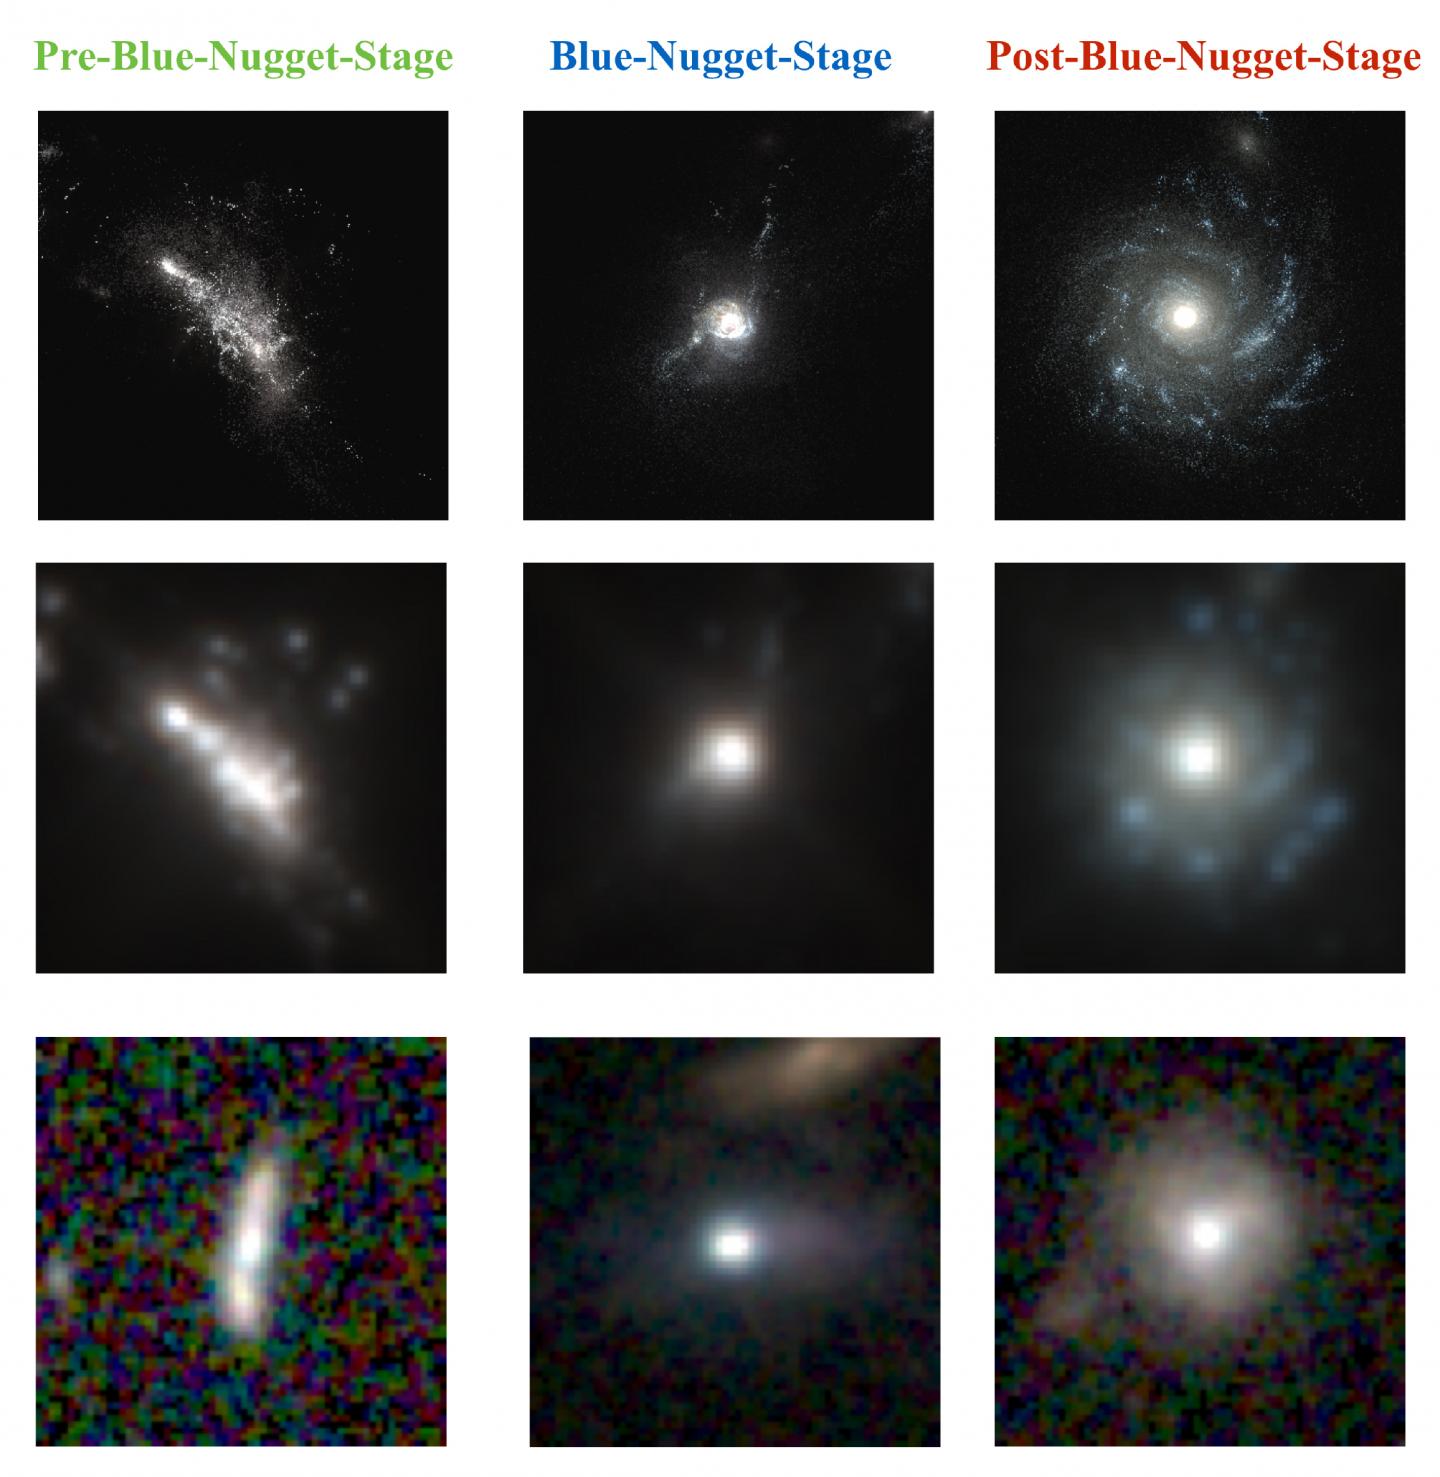 Galaxy Images